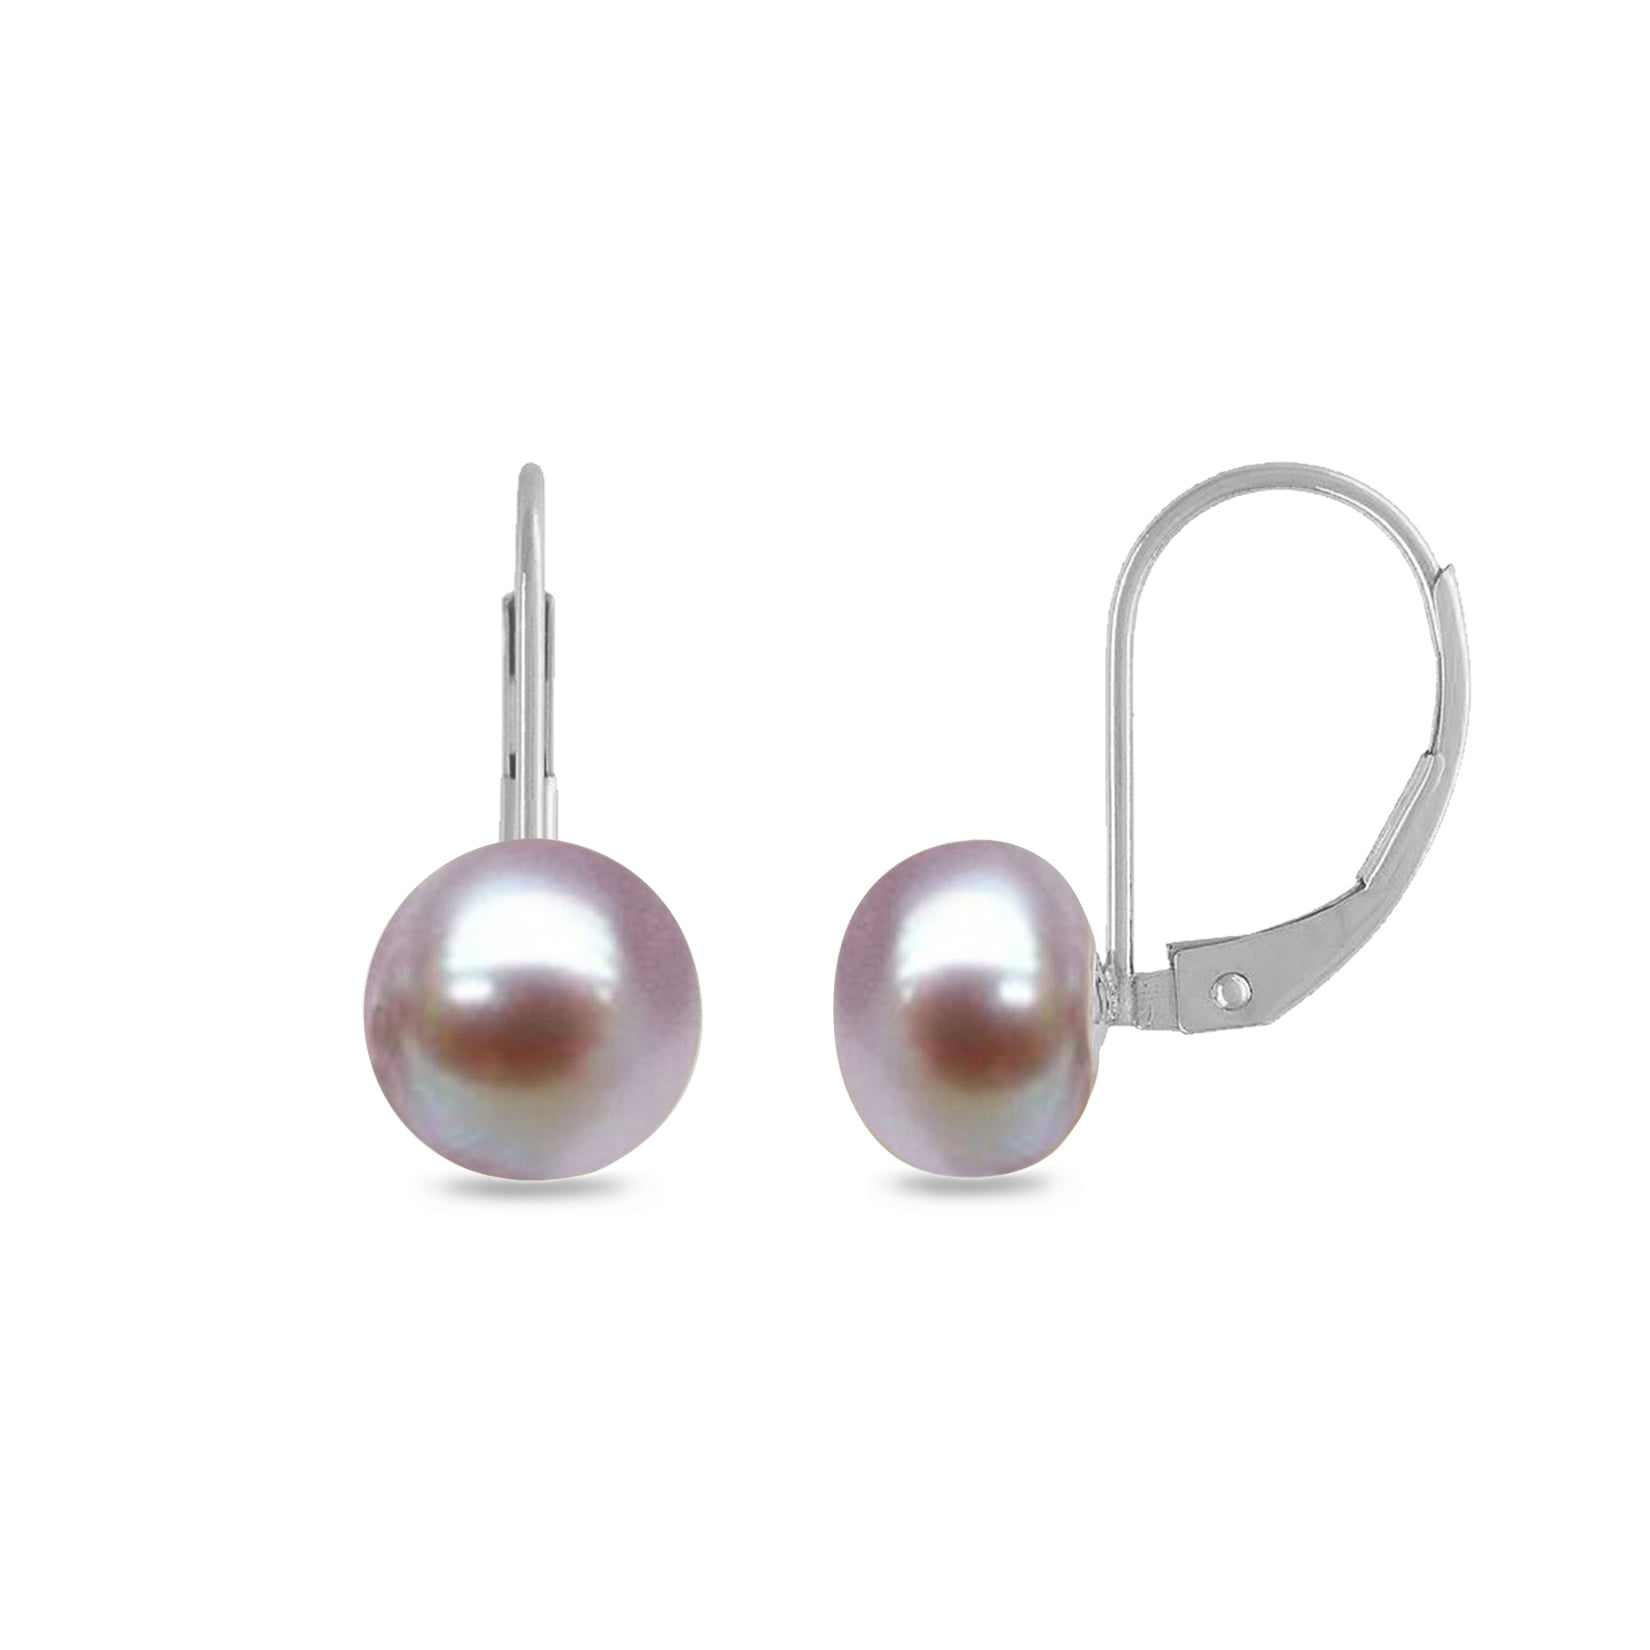 White Pearls Kezef Creations Sterling Silver Cultured Freshwater Pearl Clip On Earrings